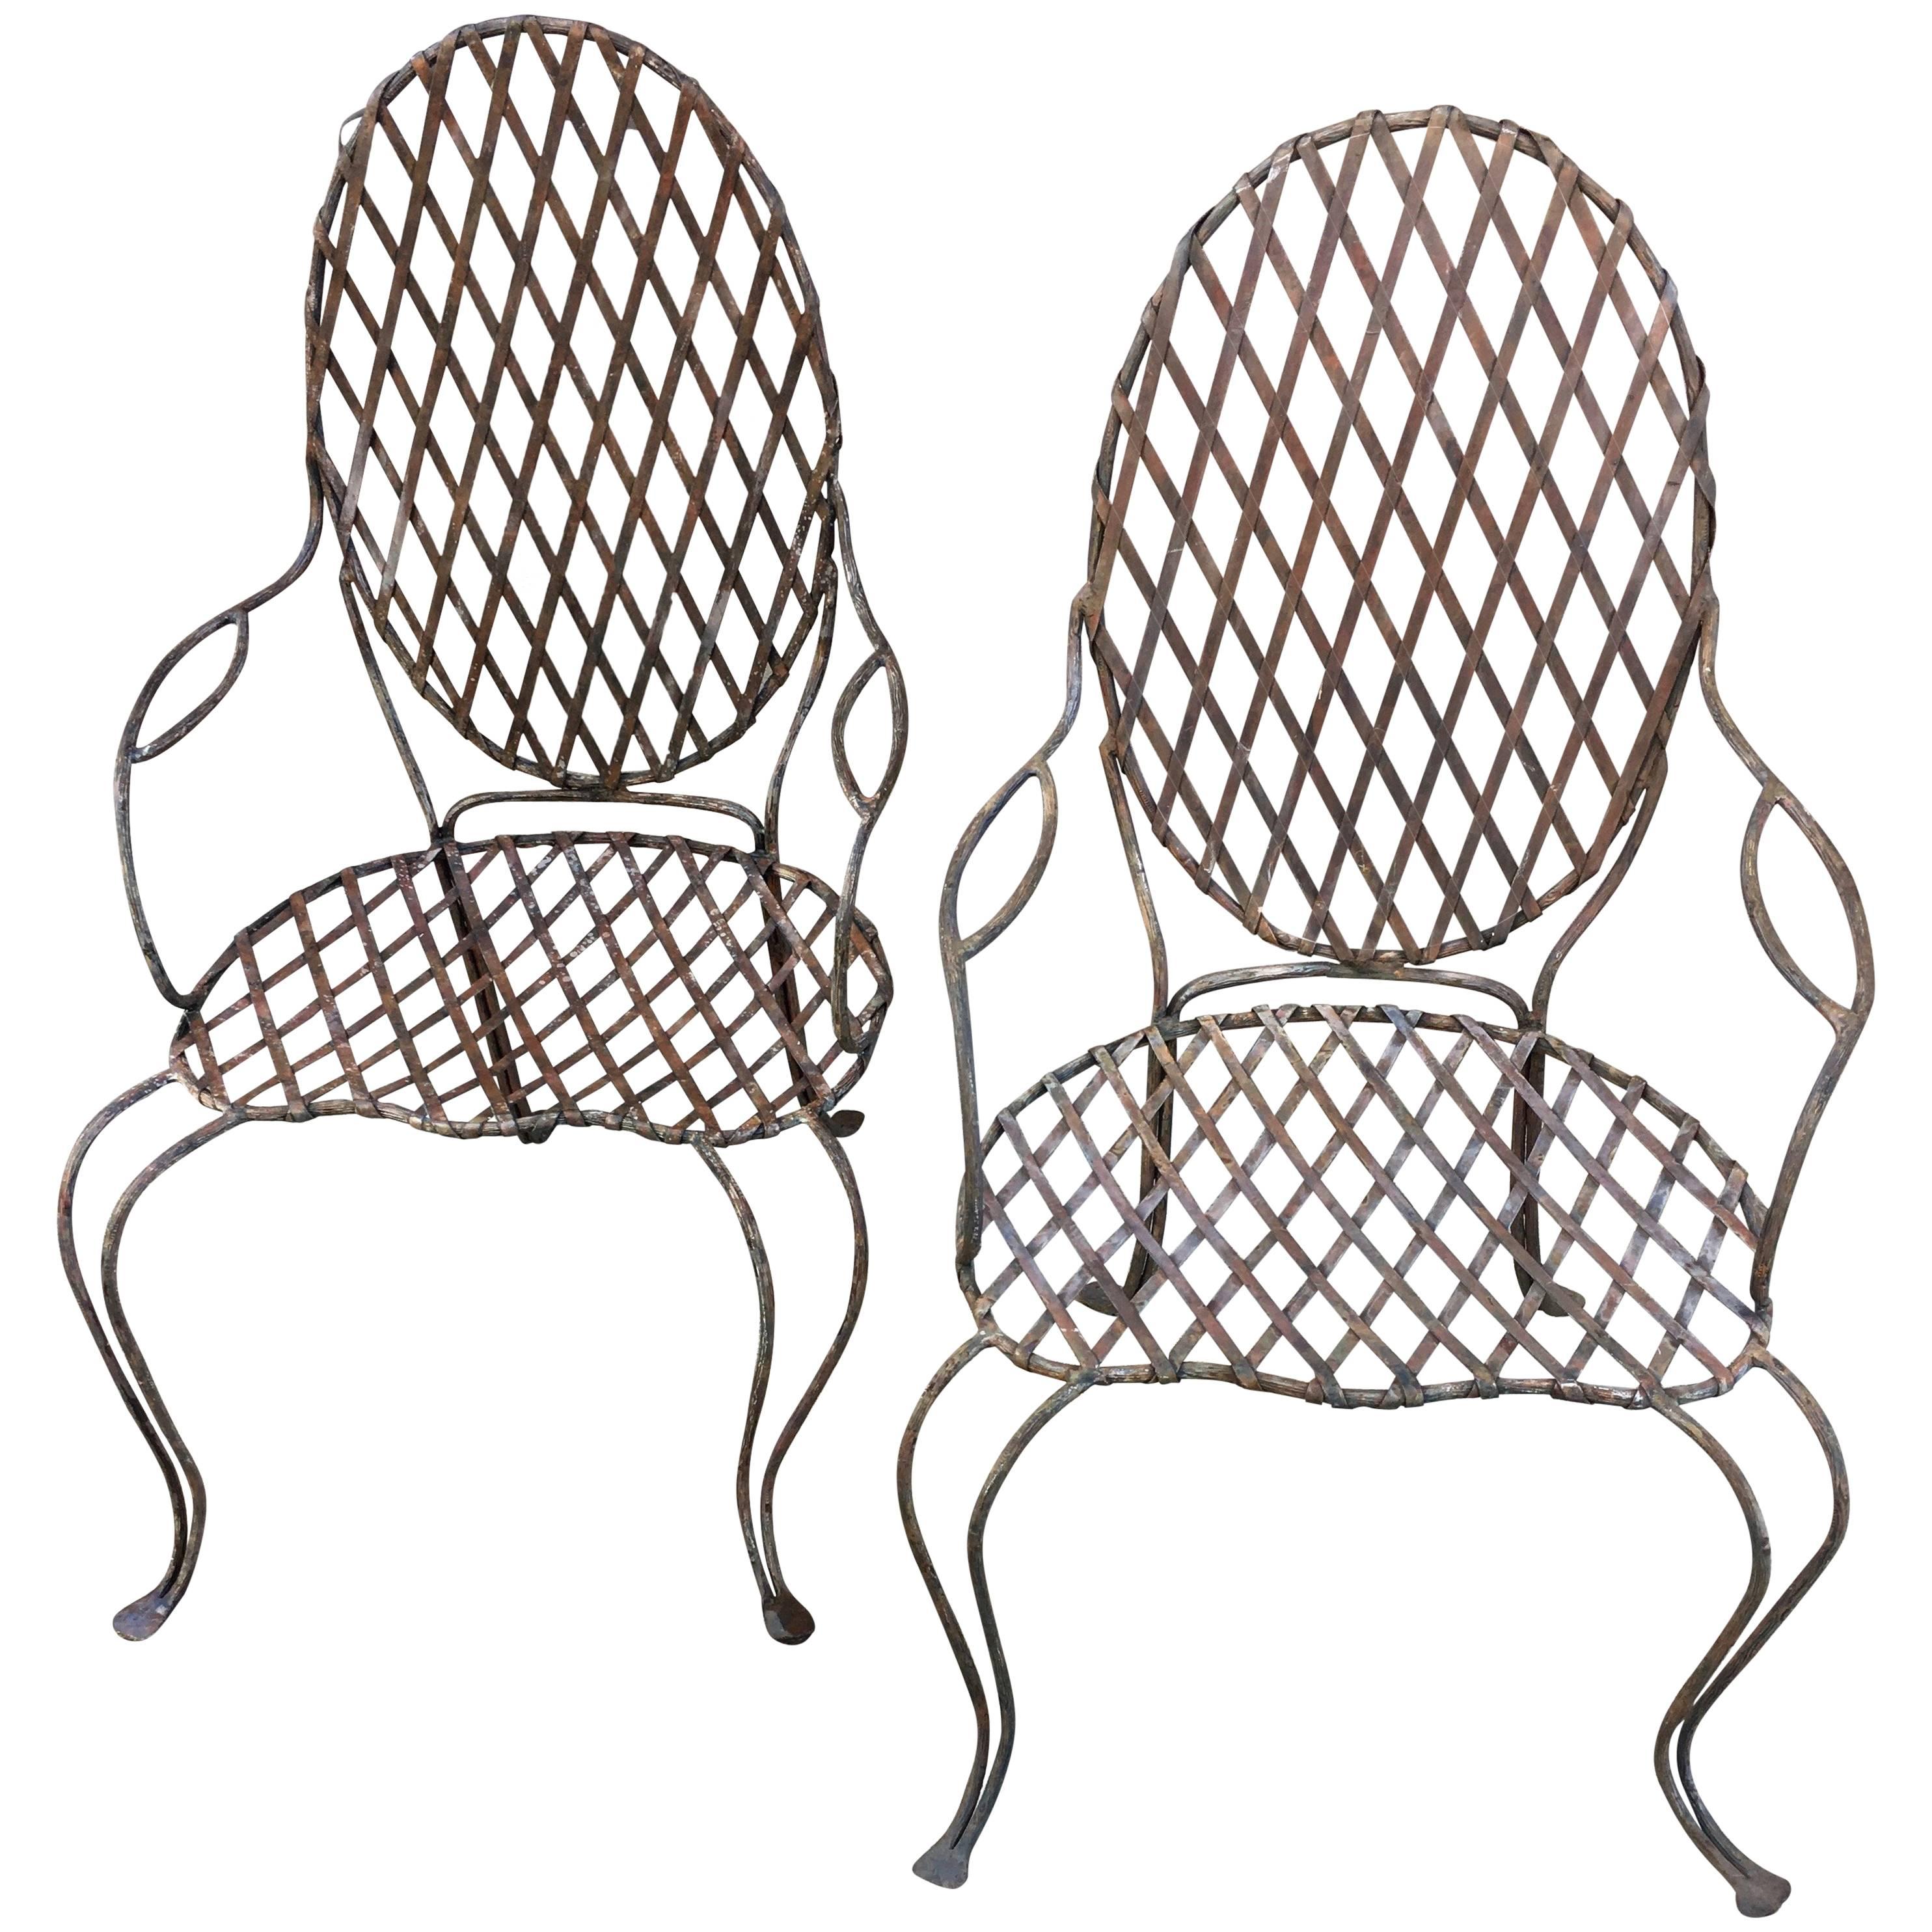 Pair of Twig Iron Outdoor Chairs by Rose Tarlow Melrose House